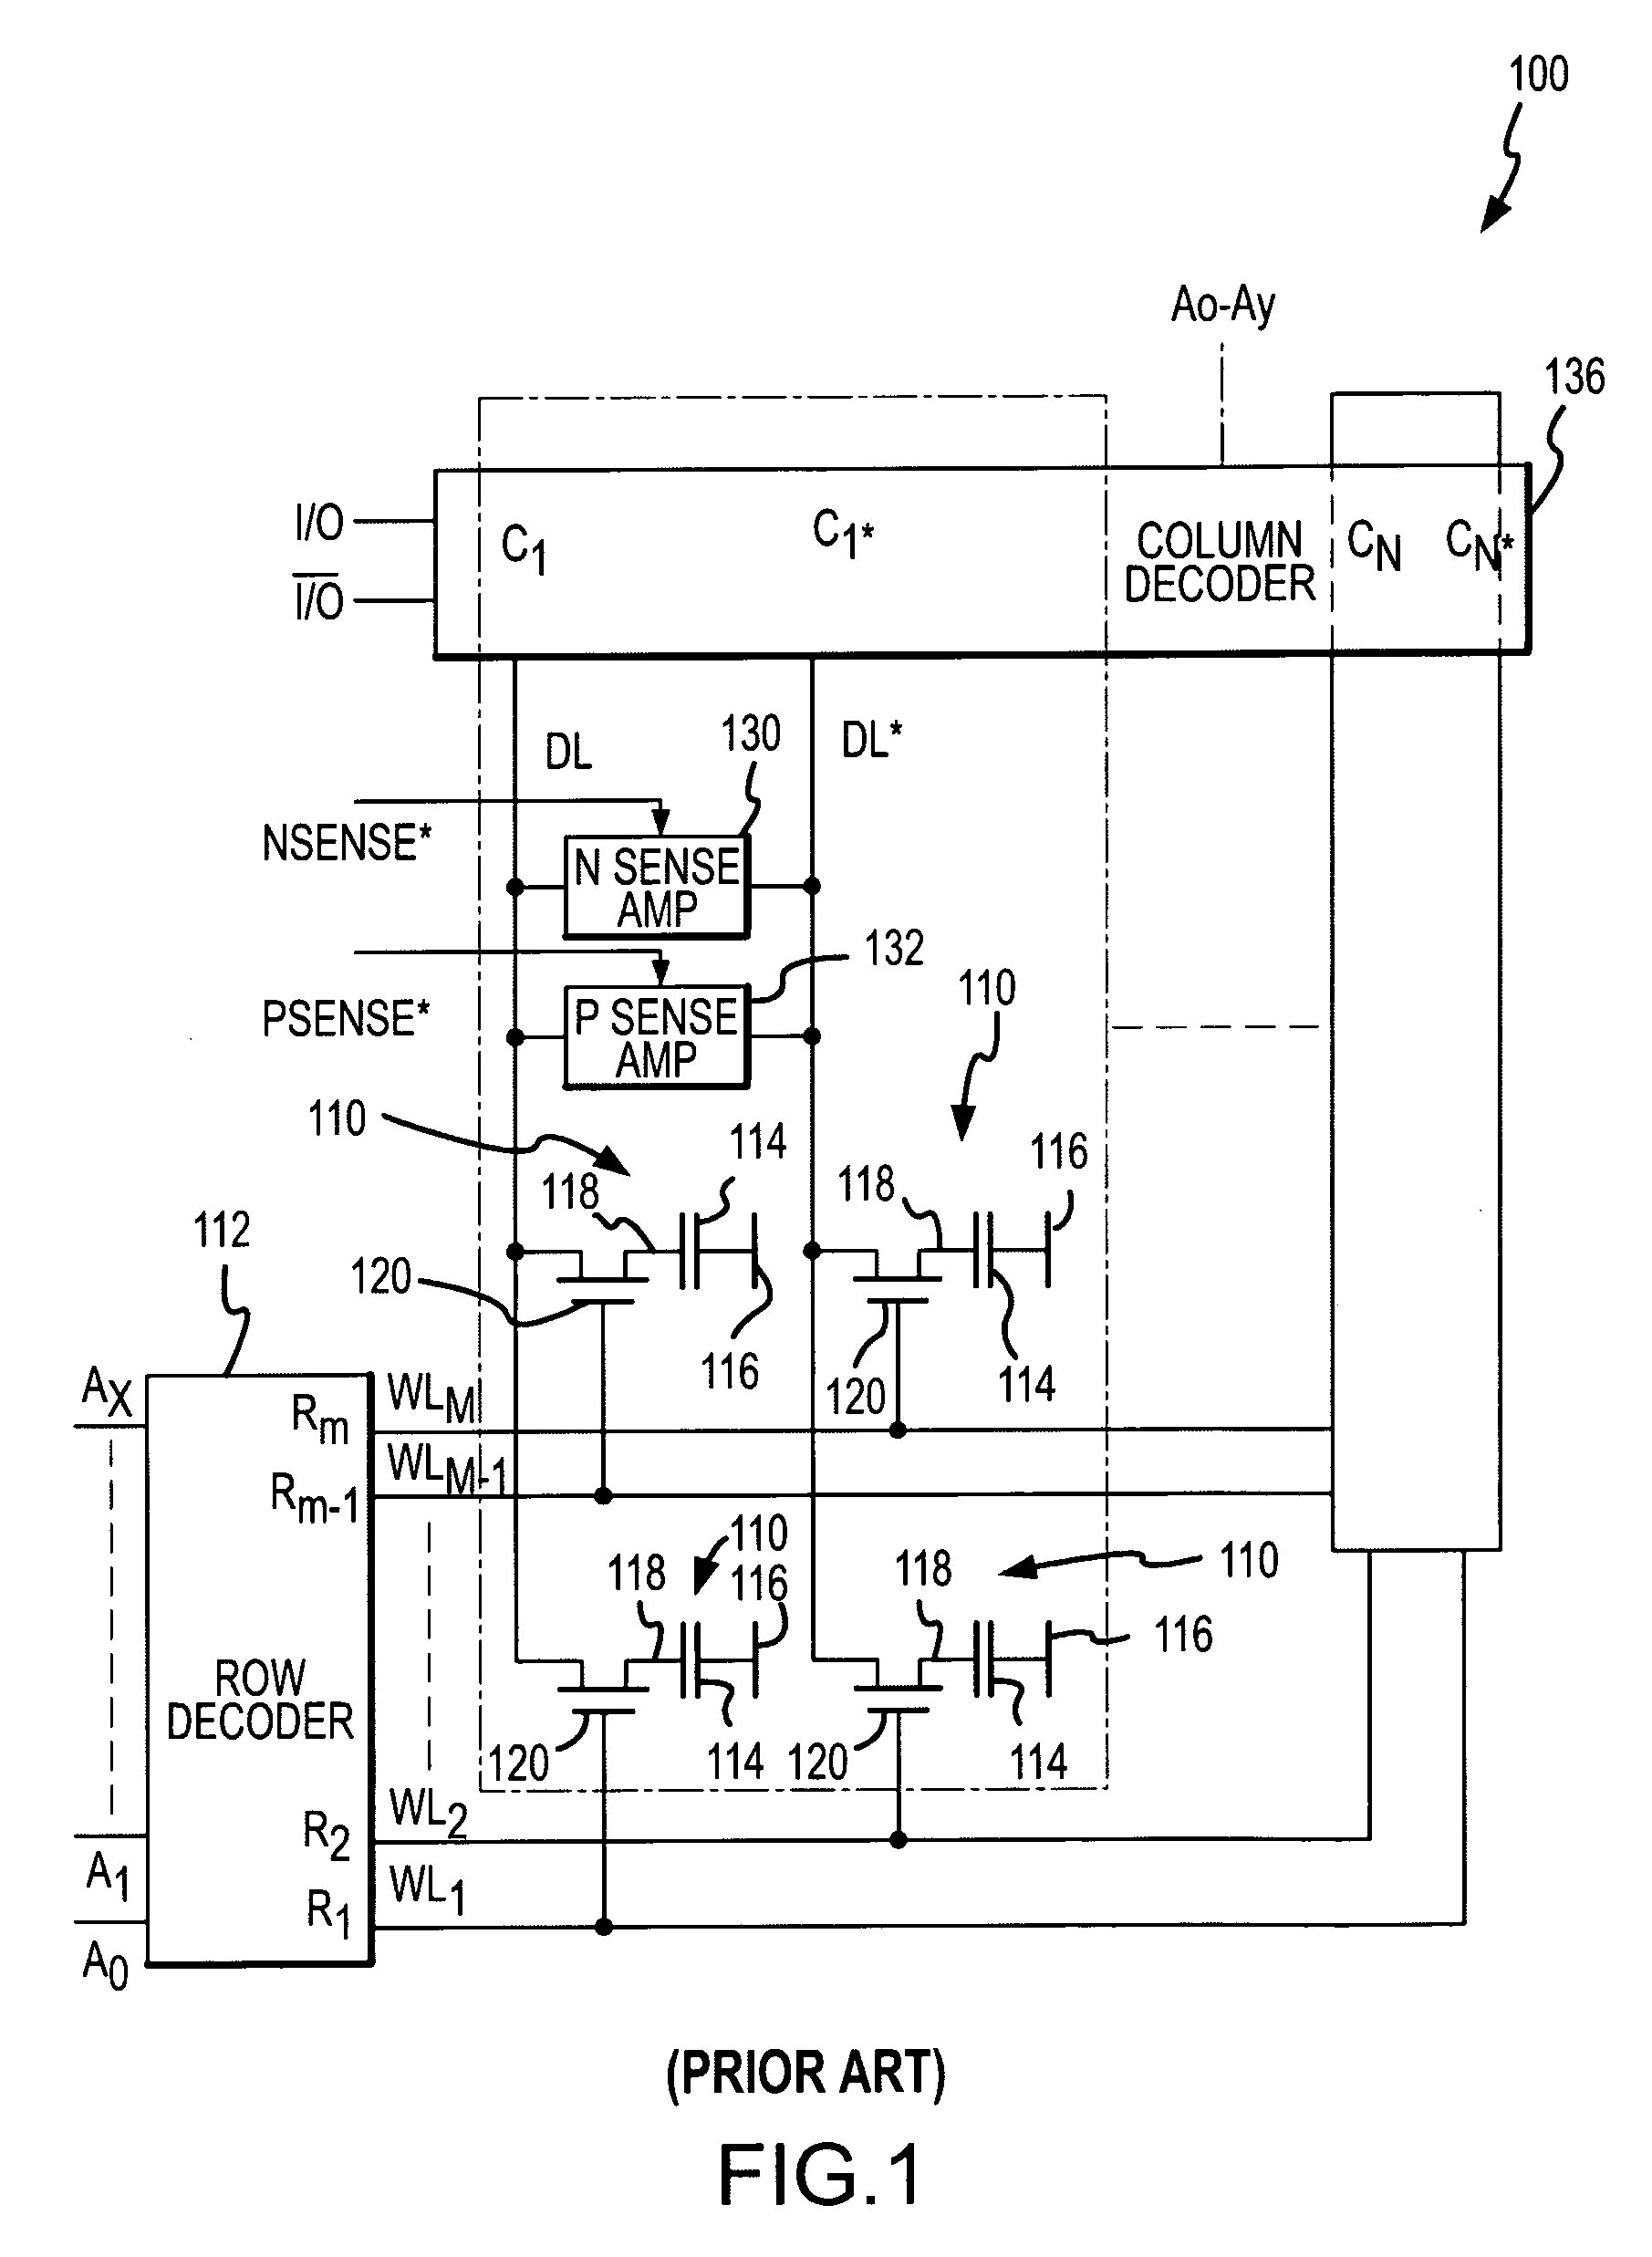 System and method for reducing power consumption during extended refresh periods of dynamic random access memory devices